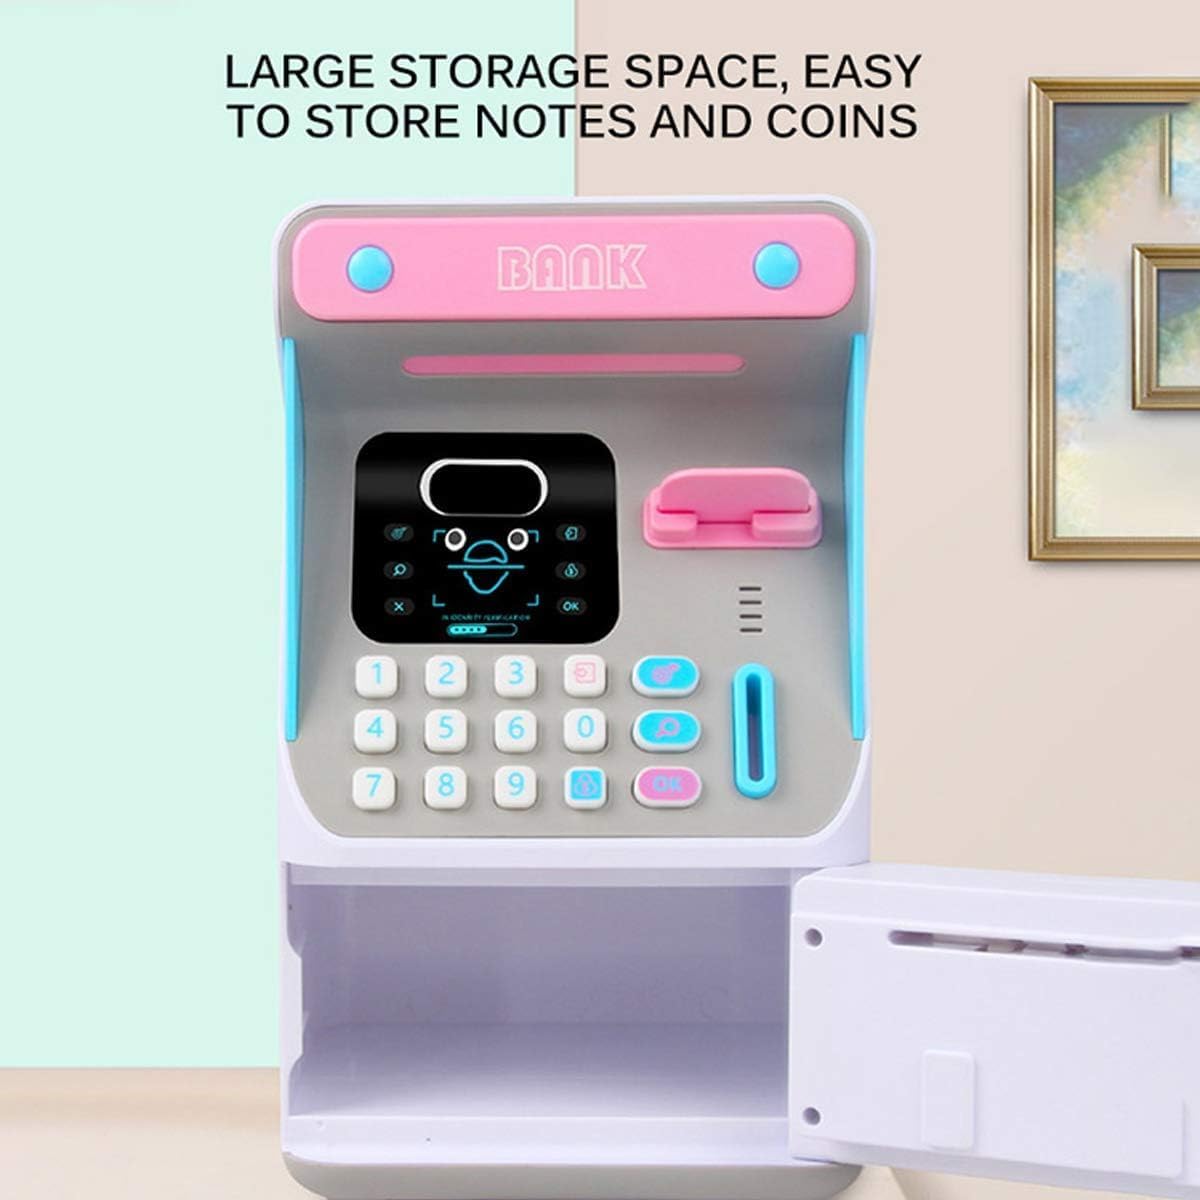 Rechargeable money box with face lock, bank card and password protection